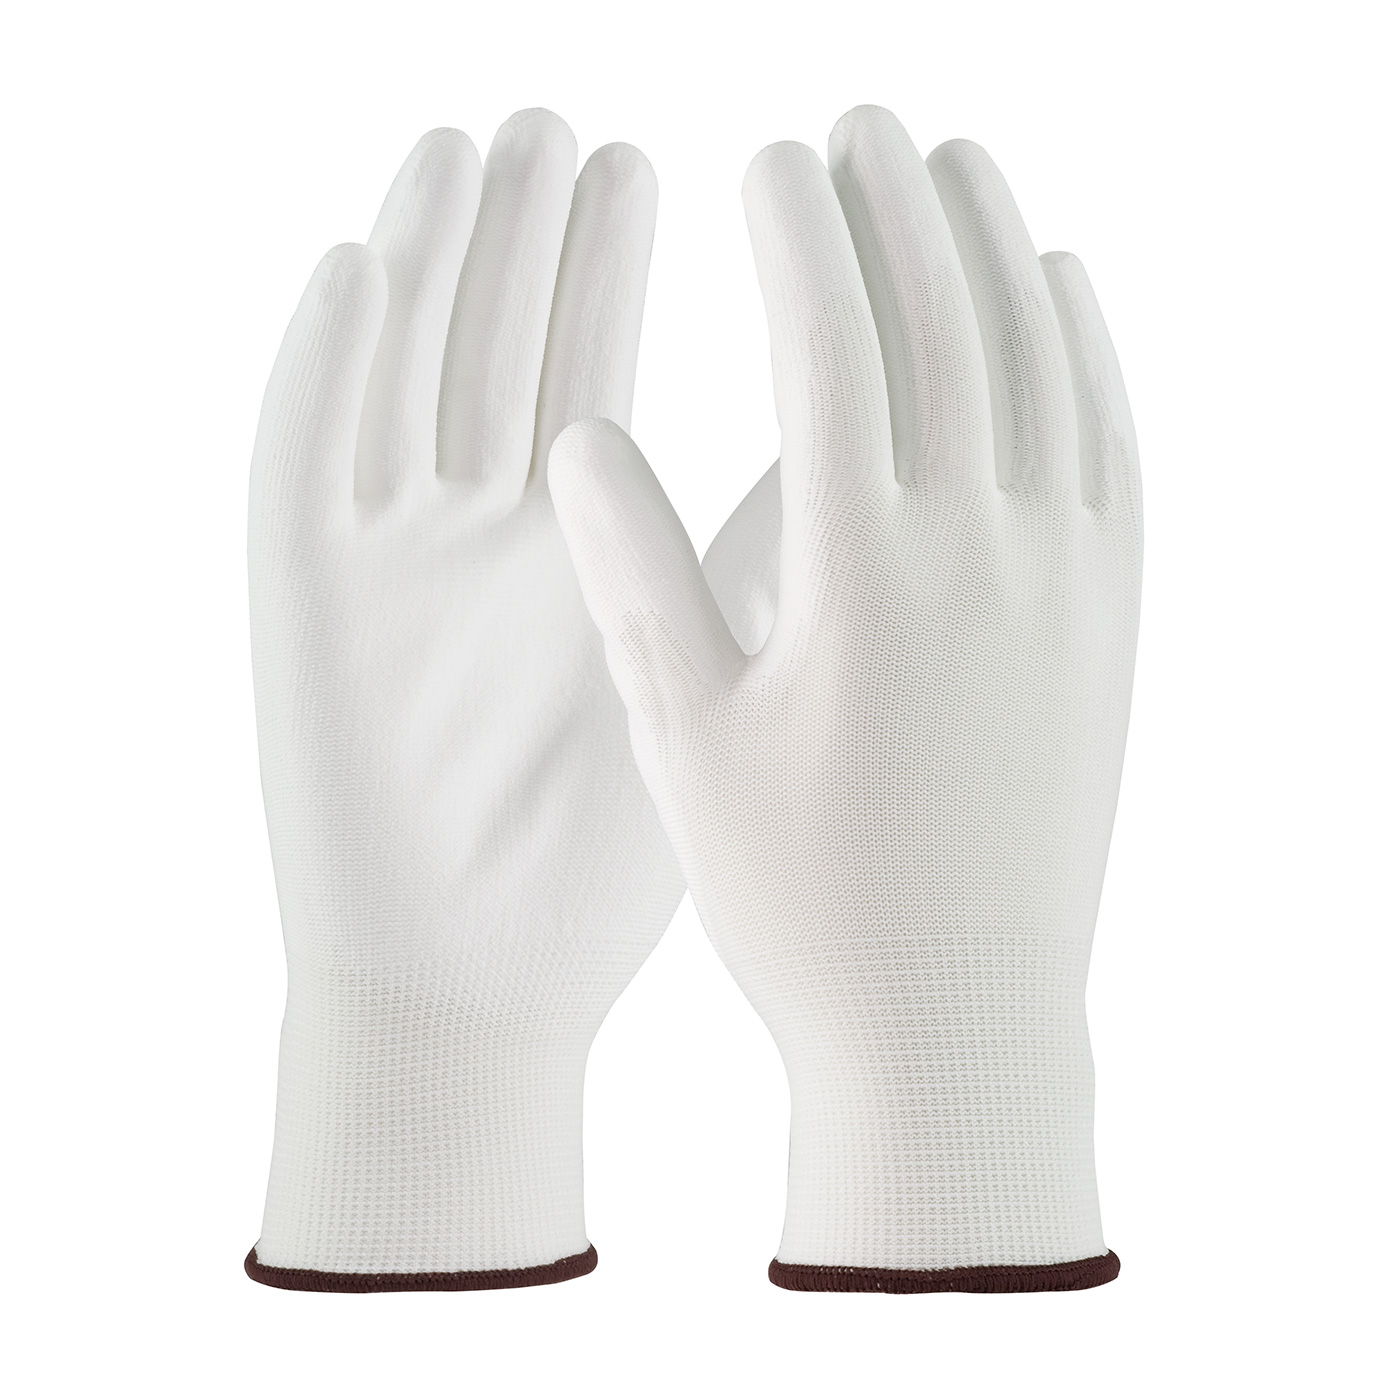 PIP® Seamless Knit White Polyester Glove with White Polyurethane Coated Smooth Grip on Palm & Fingers #33-115